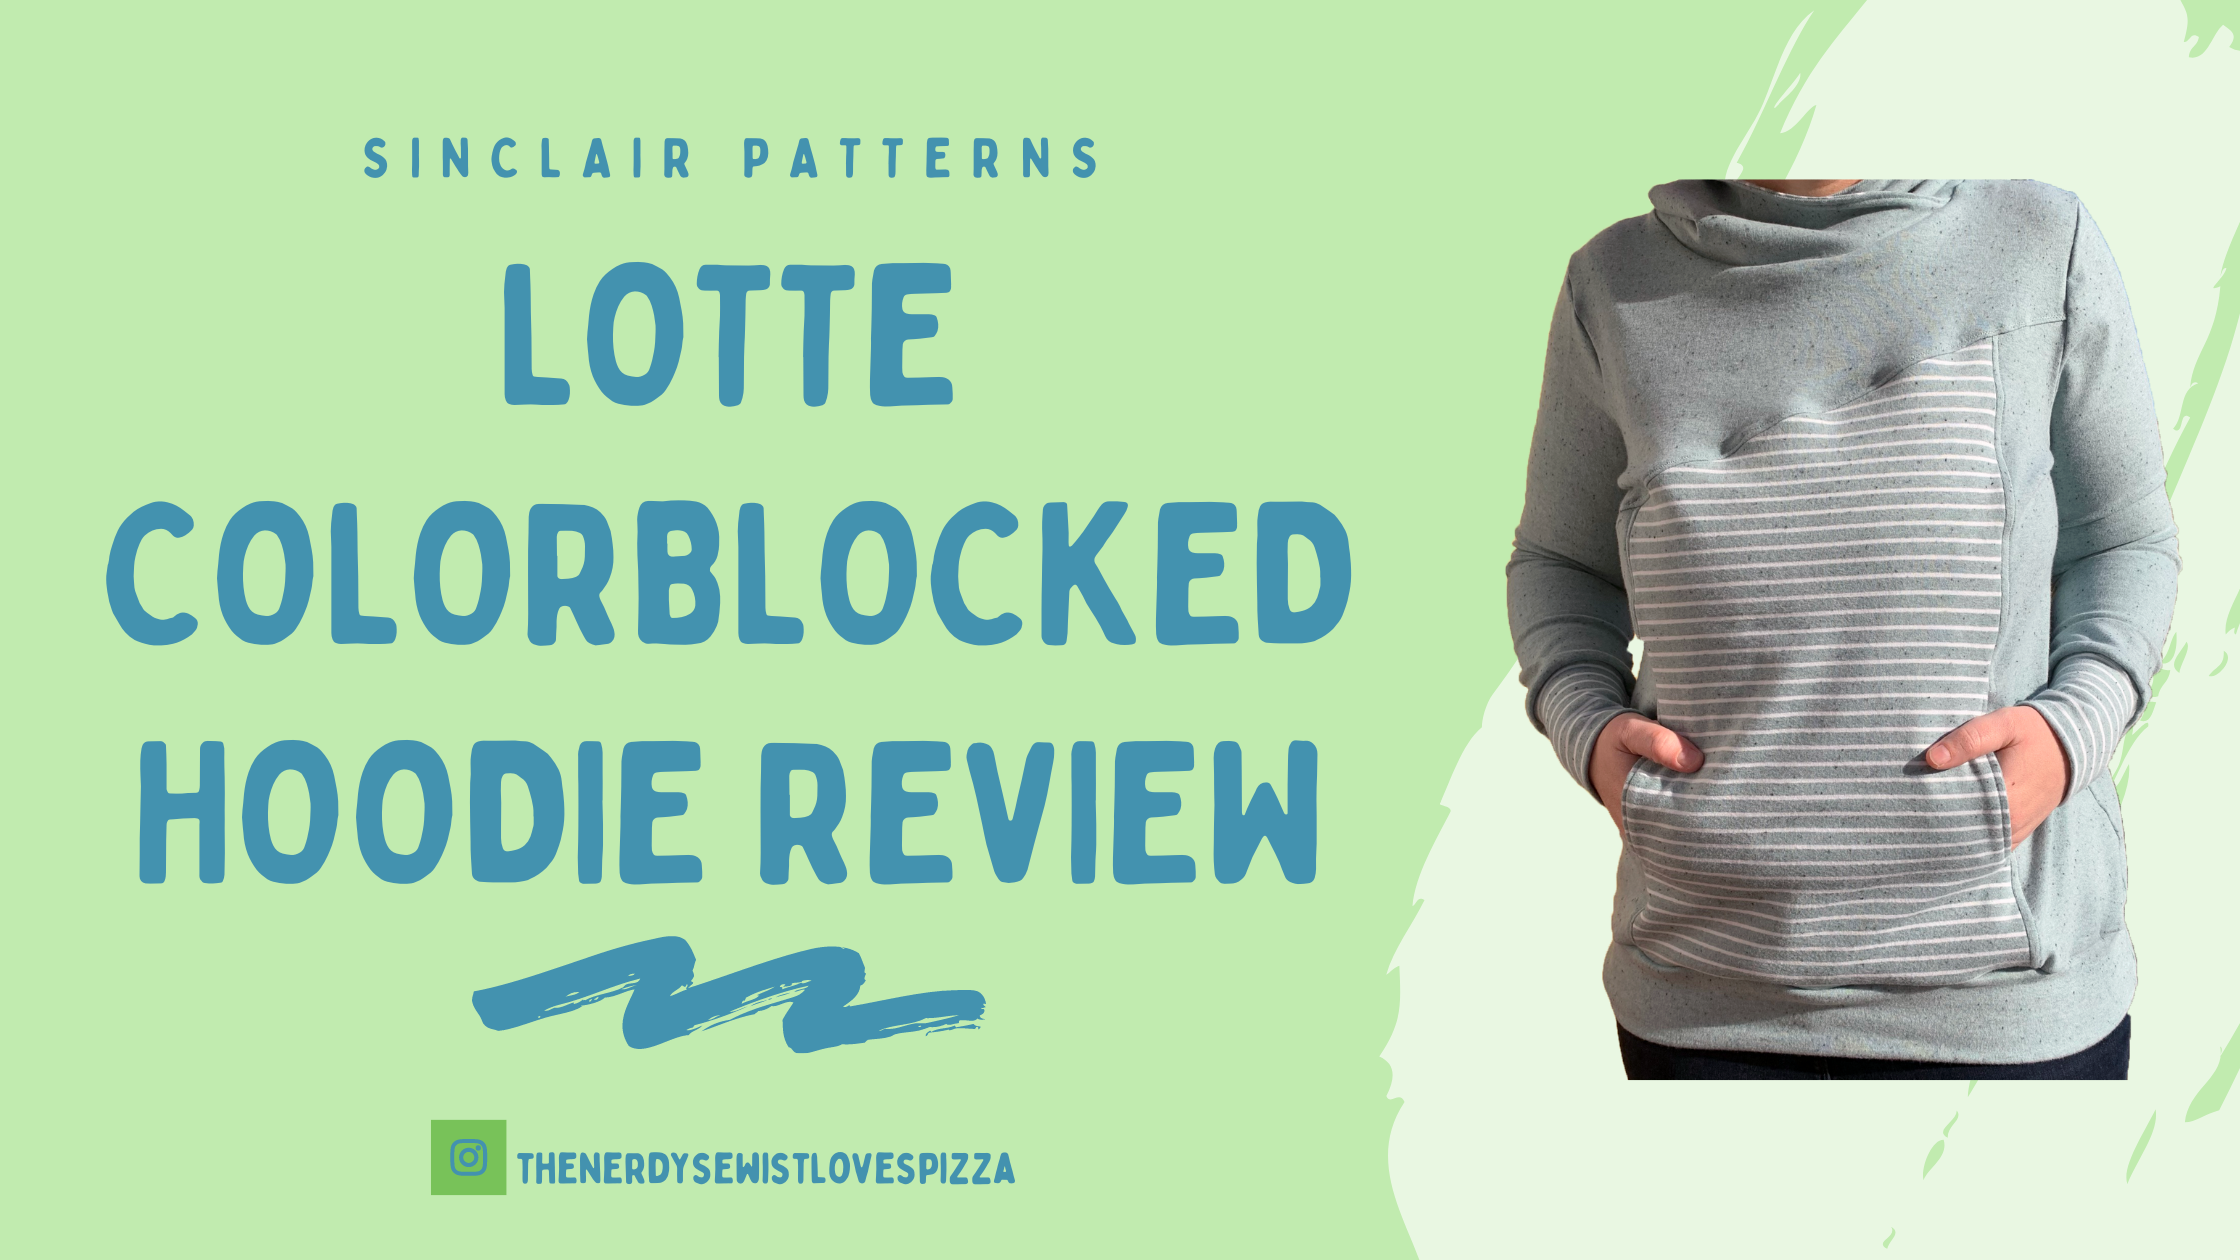 Sinclair Patterns - Lotte Colorblocked Hoodie Review - The Nerdy Sewist  Loves Pizza